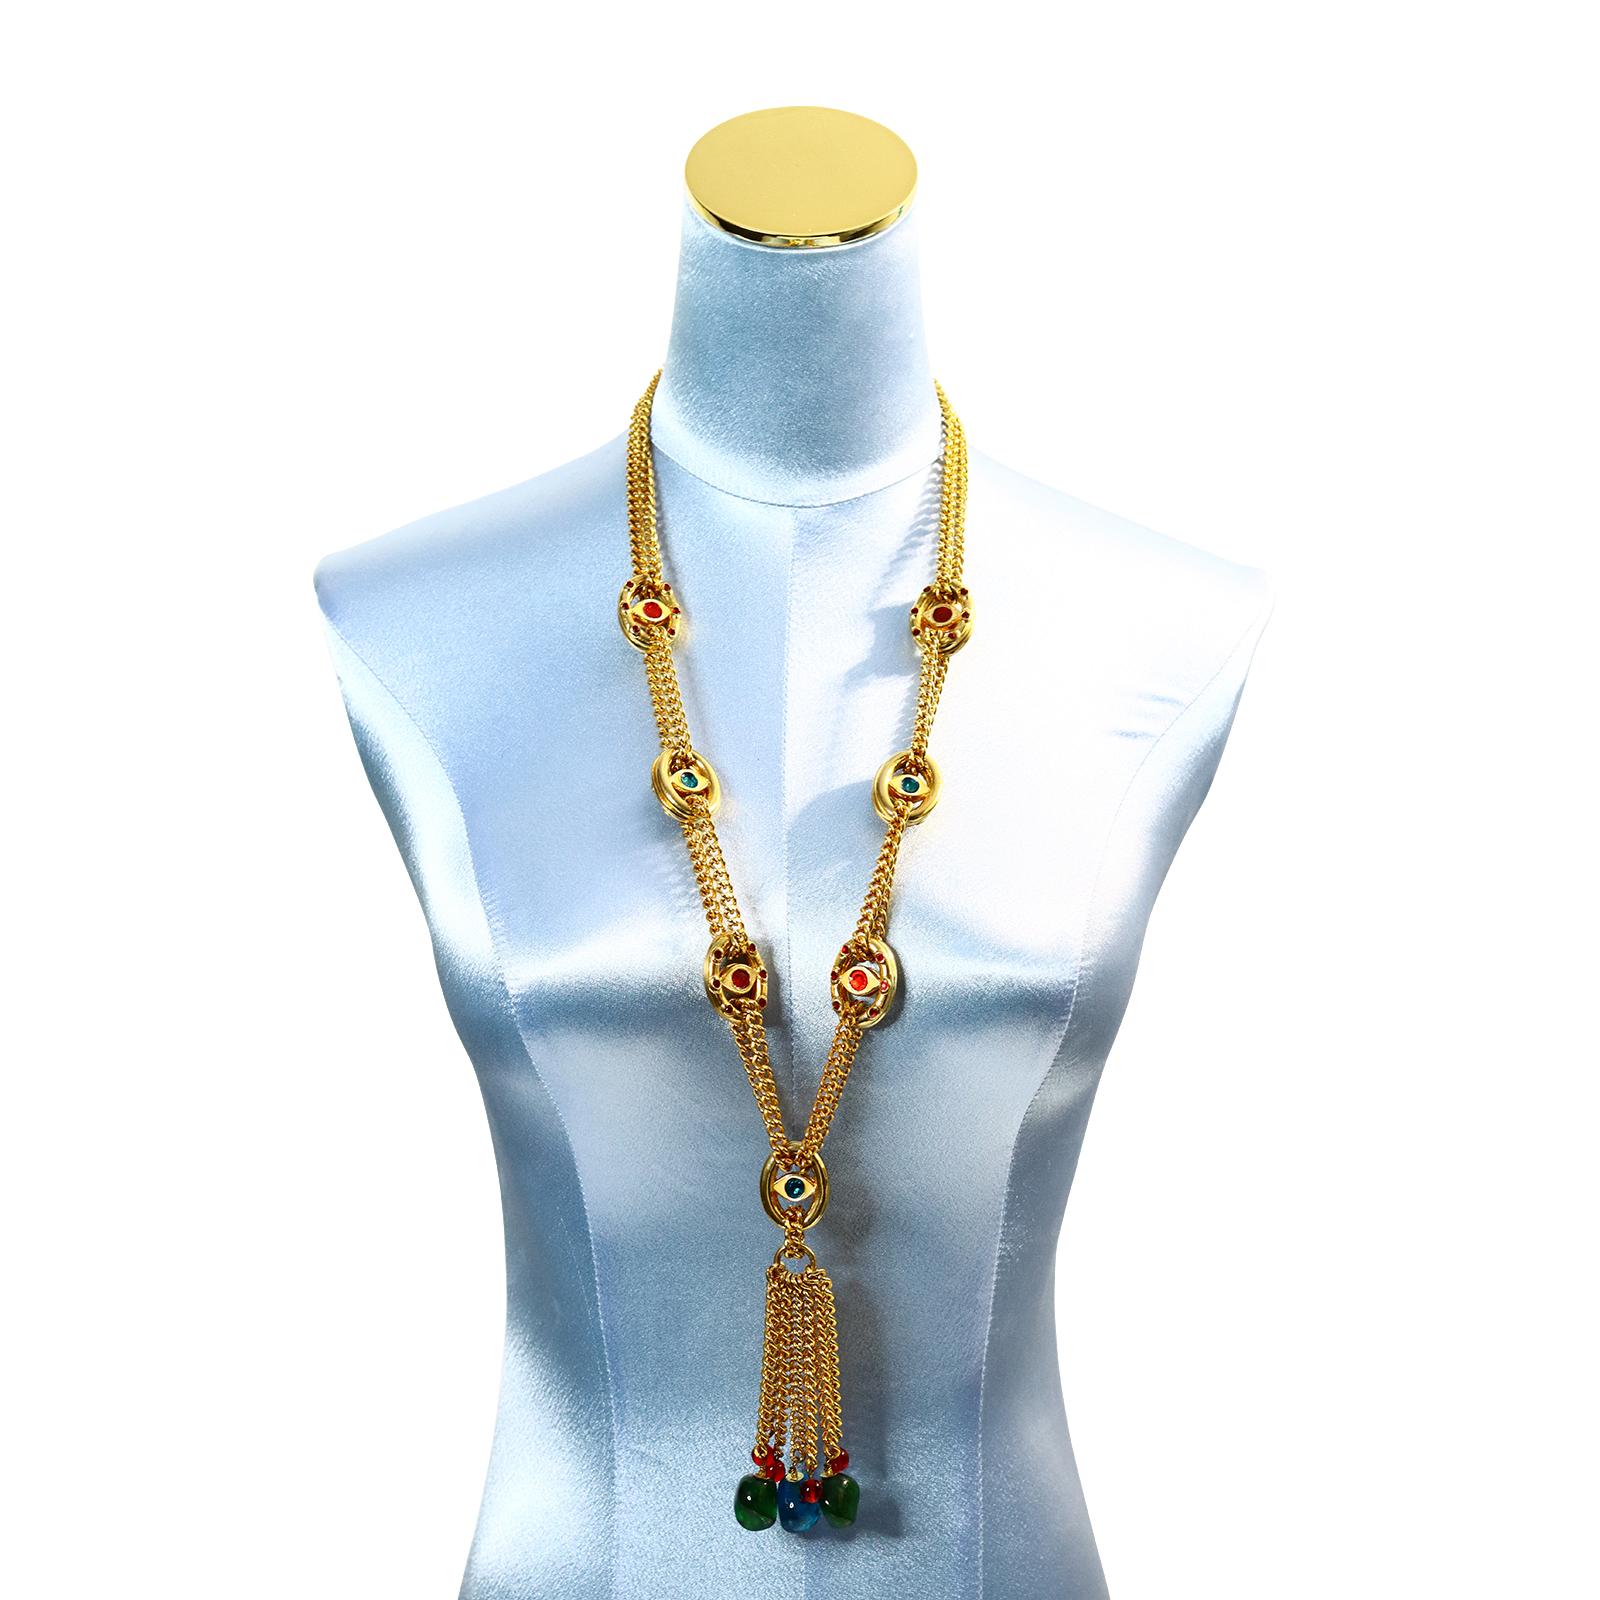 Vintage Billy Boy Gold Tone Evil Eye Long Necklace Sautoir.  Double Strands of Gold Chain and Double Pieces of  Evil Eye that are Enameled with Red, Green and White.  They are then joined together at the bottom with dangling strands of Gold Chain